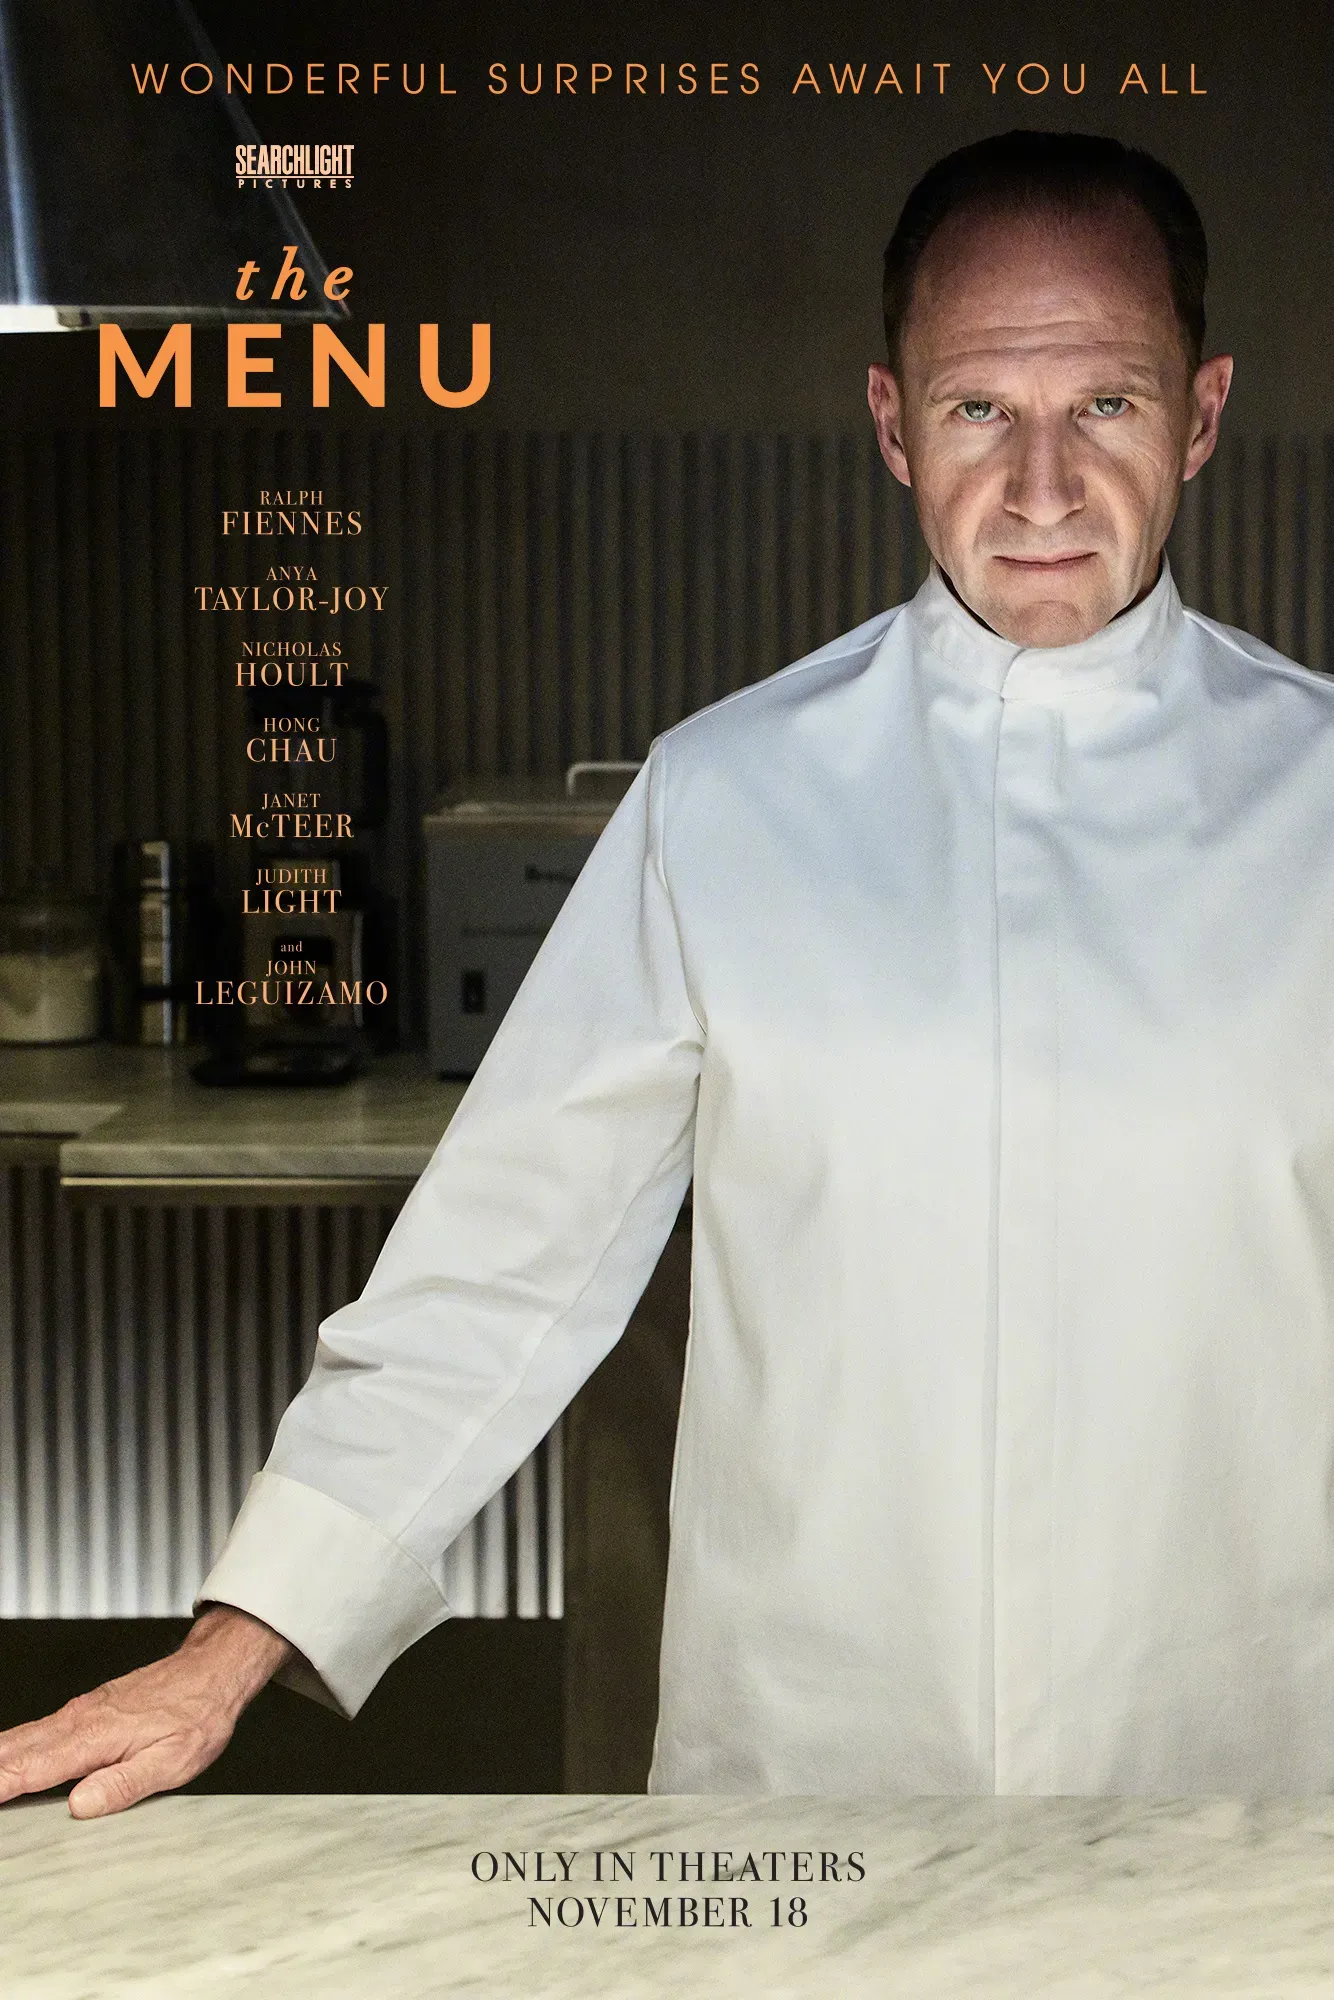 Dark Comedy Psychological Thriller 'The Menu' Releases Official Trailer and Poster | FMV6